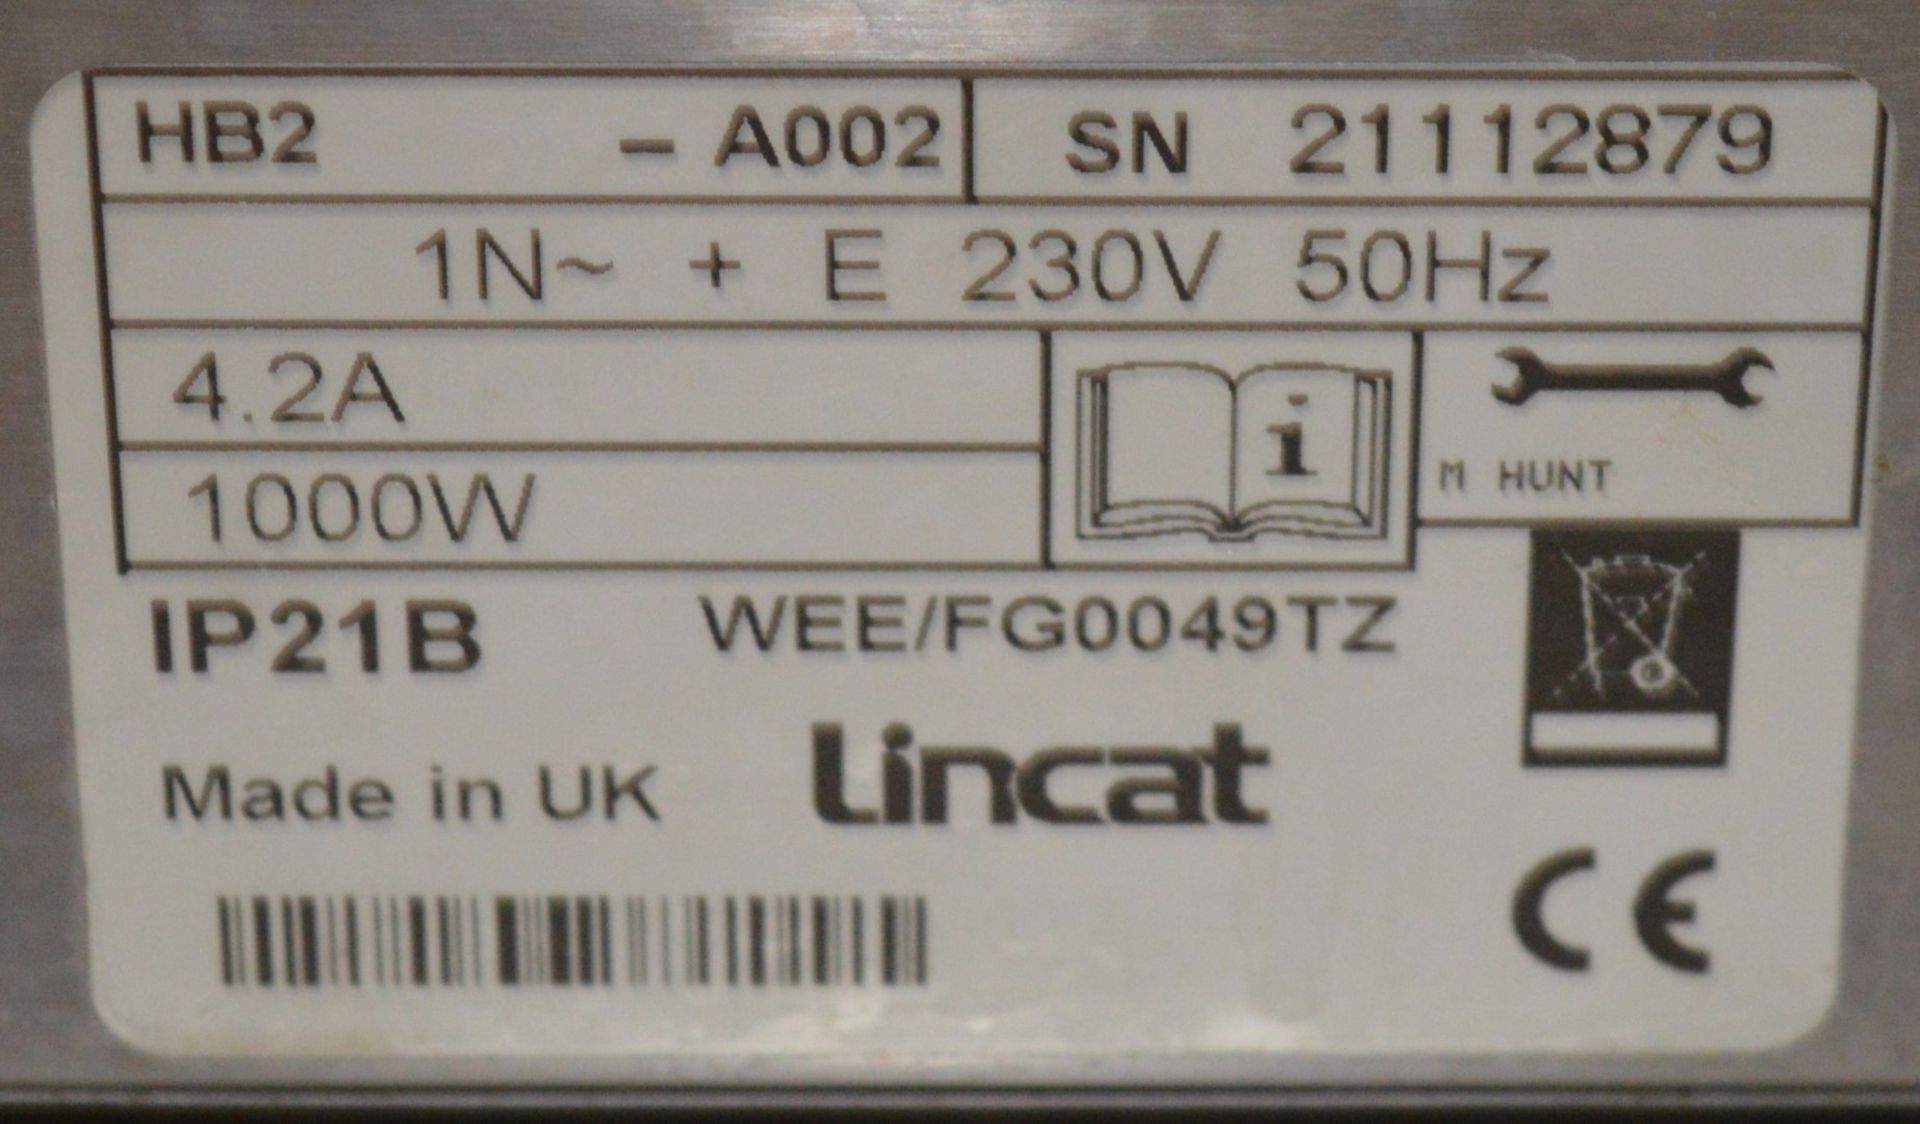 1 x Lincat HB2 Heated Display Base - Thermostic Heat Control - Rating 1000w 240v - Aluminium Surface - Image 5 of 6